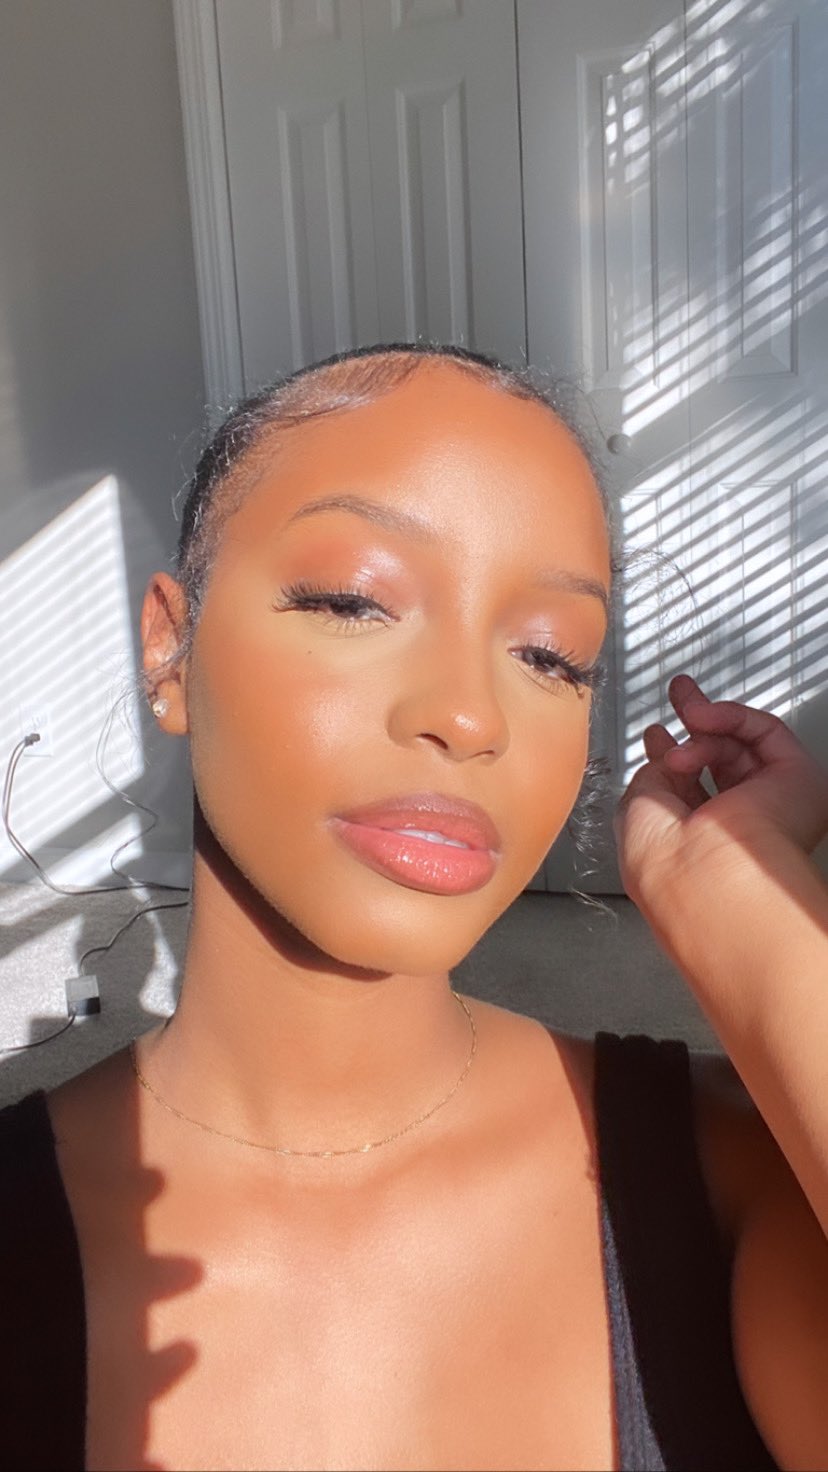 just zariah on Twitter: "tried to film makeup tutorial but it deleted :/ https://t.co/lxyDwQFtF4" / Twitter